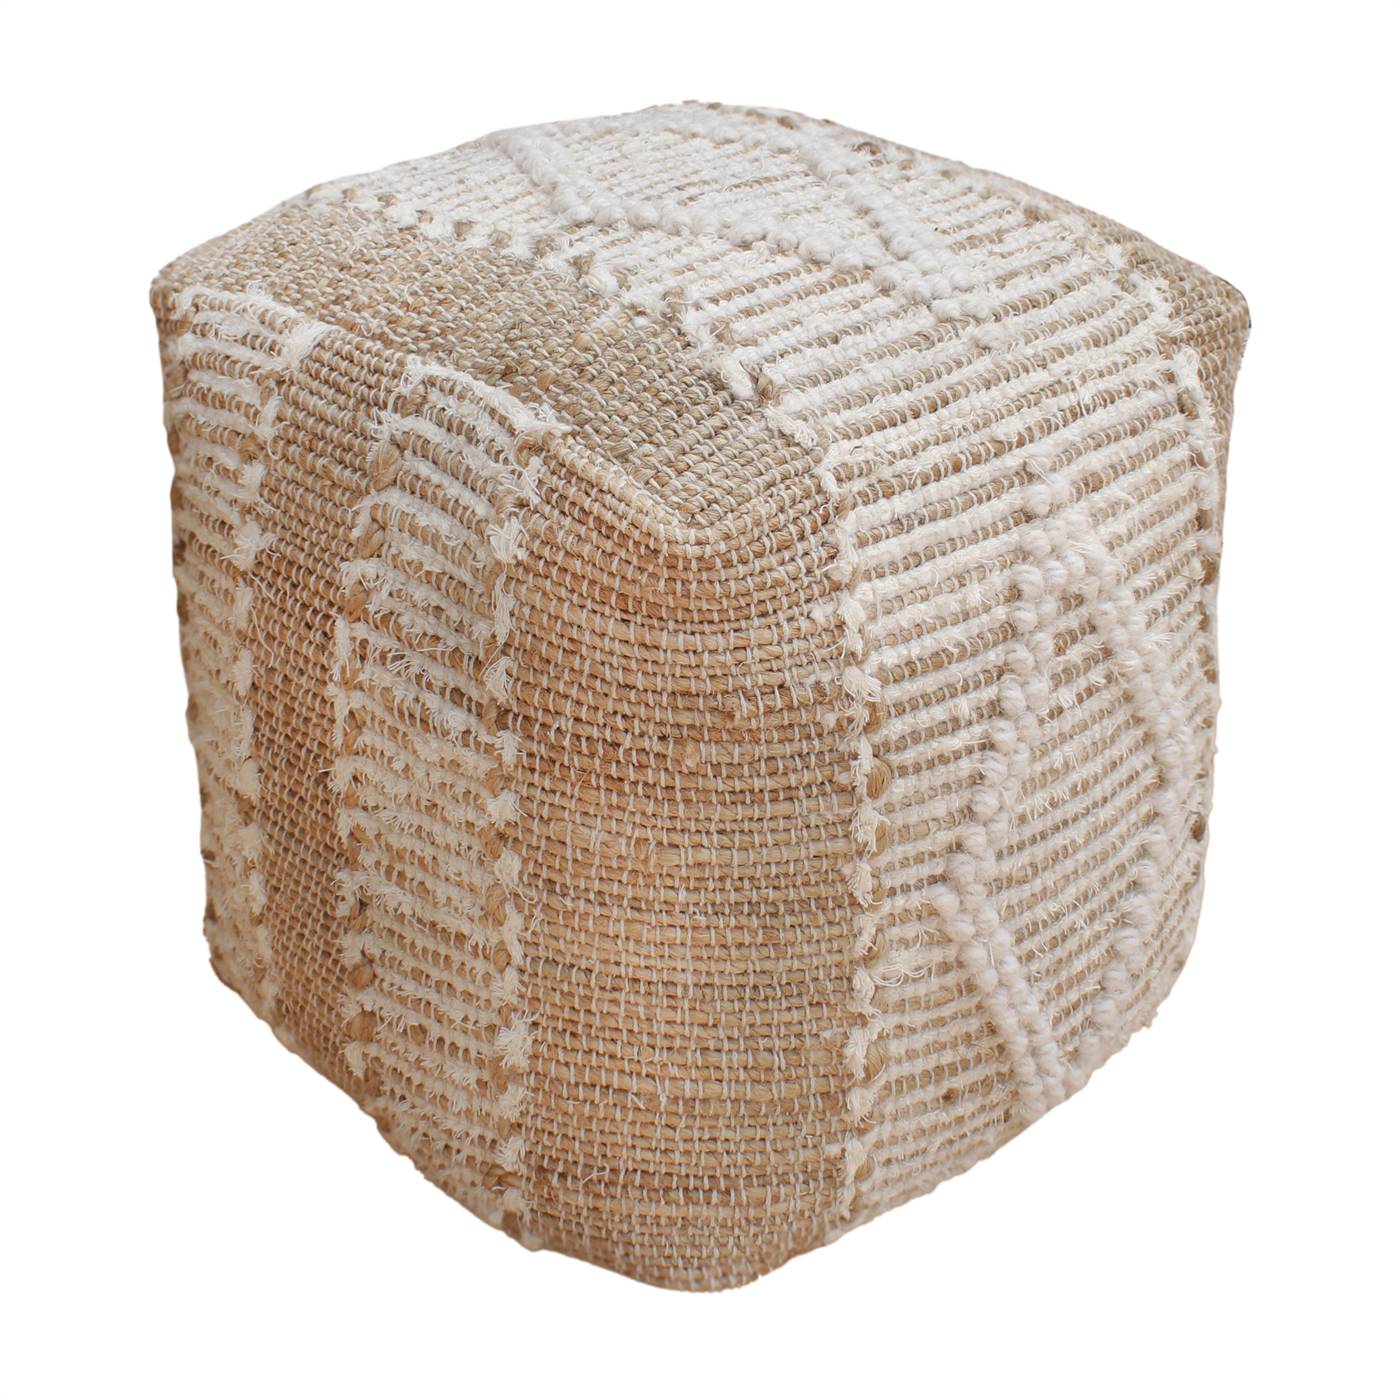 Golem Pouf, 40x40x40 cm, Natural White, Natural, Jute, Cotton Salvage, Wool, Hand Woven, Pitloom, All Loop